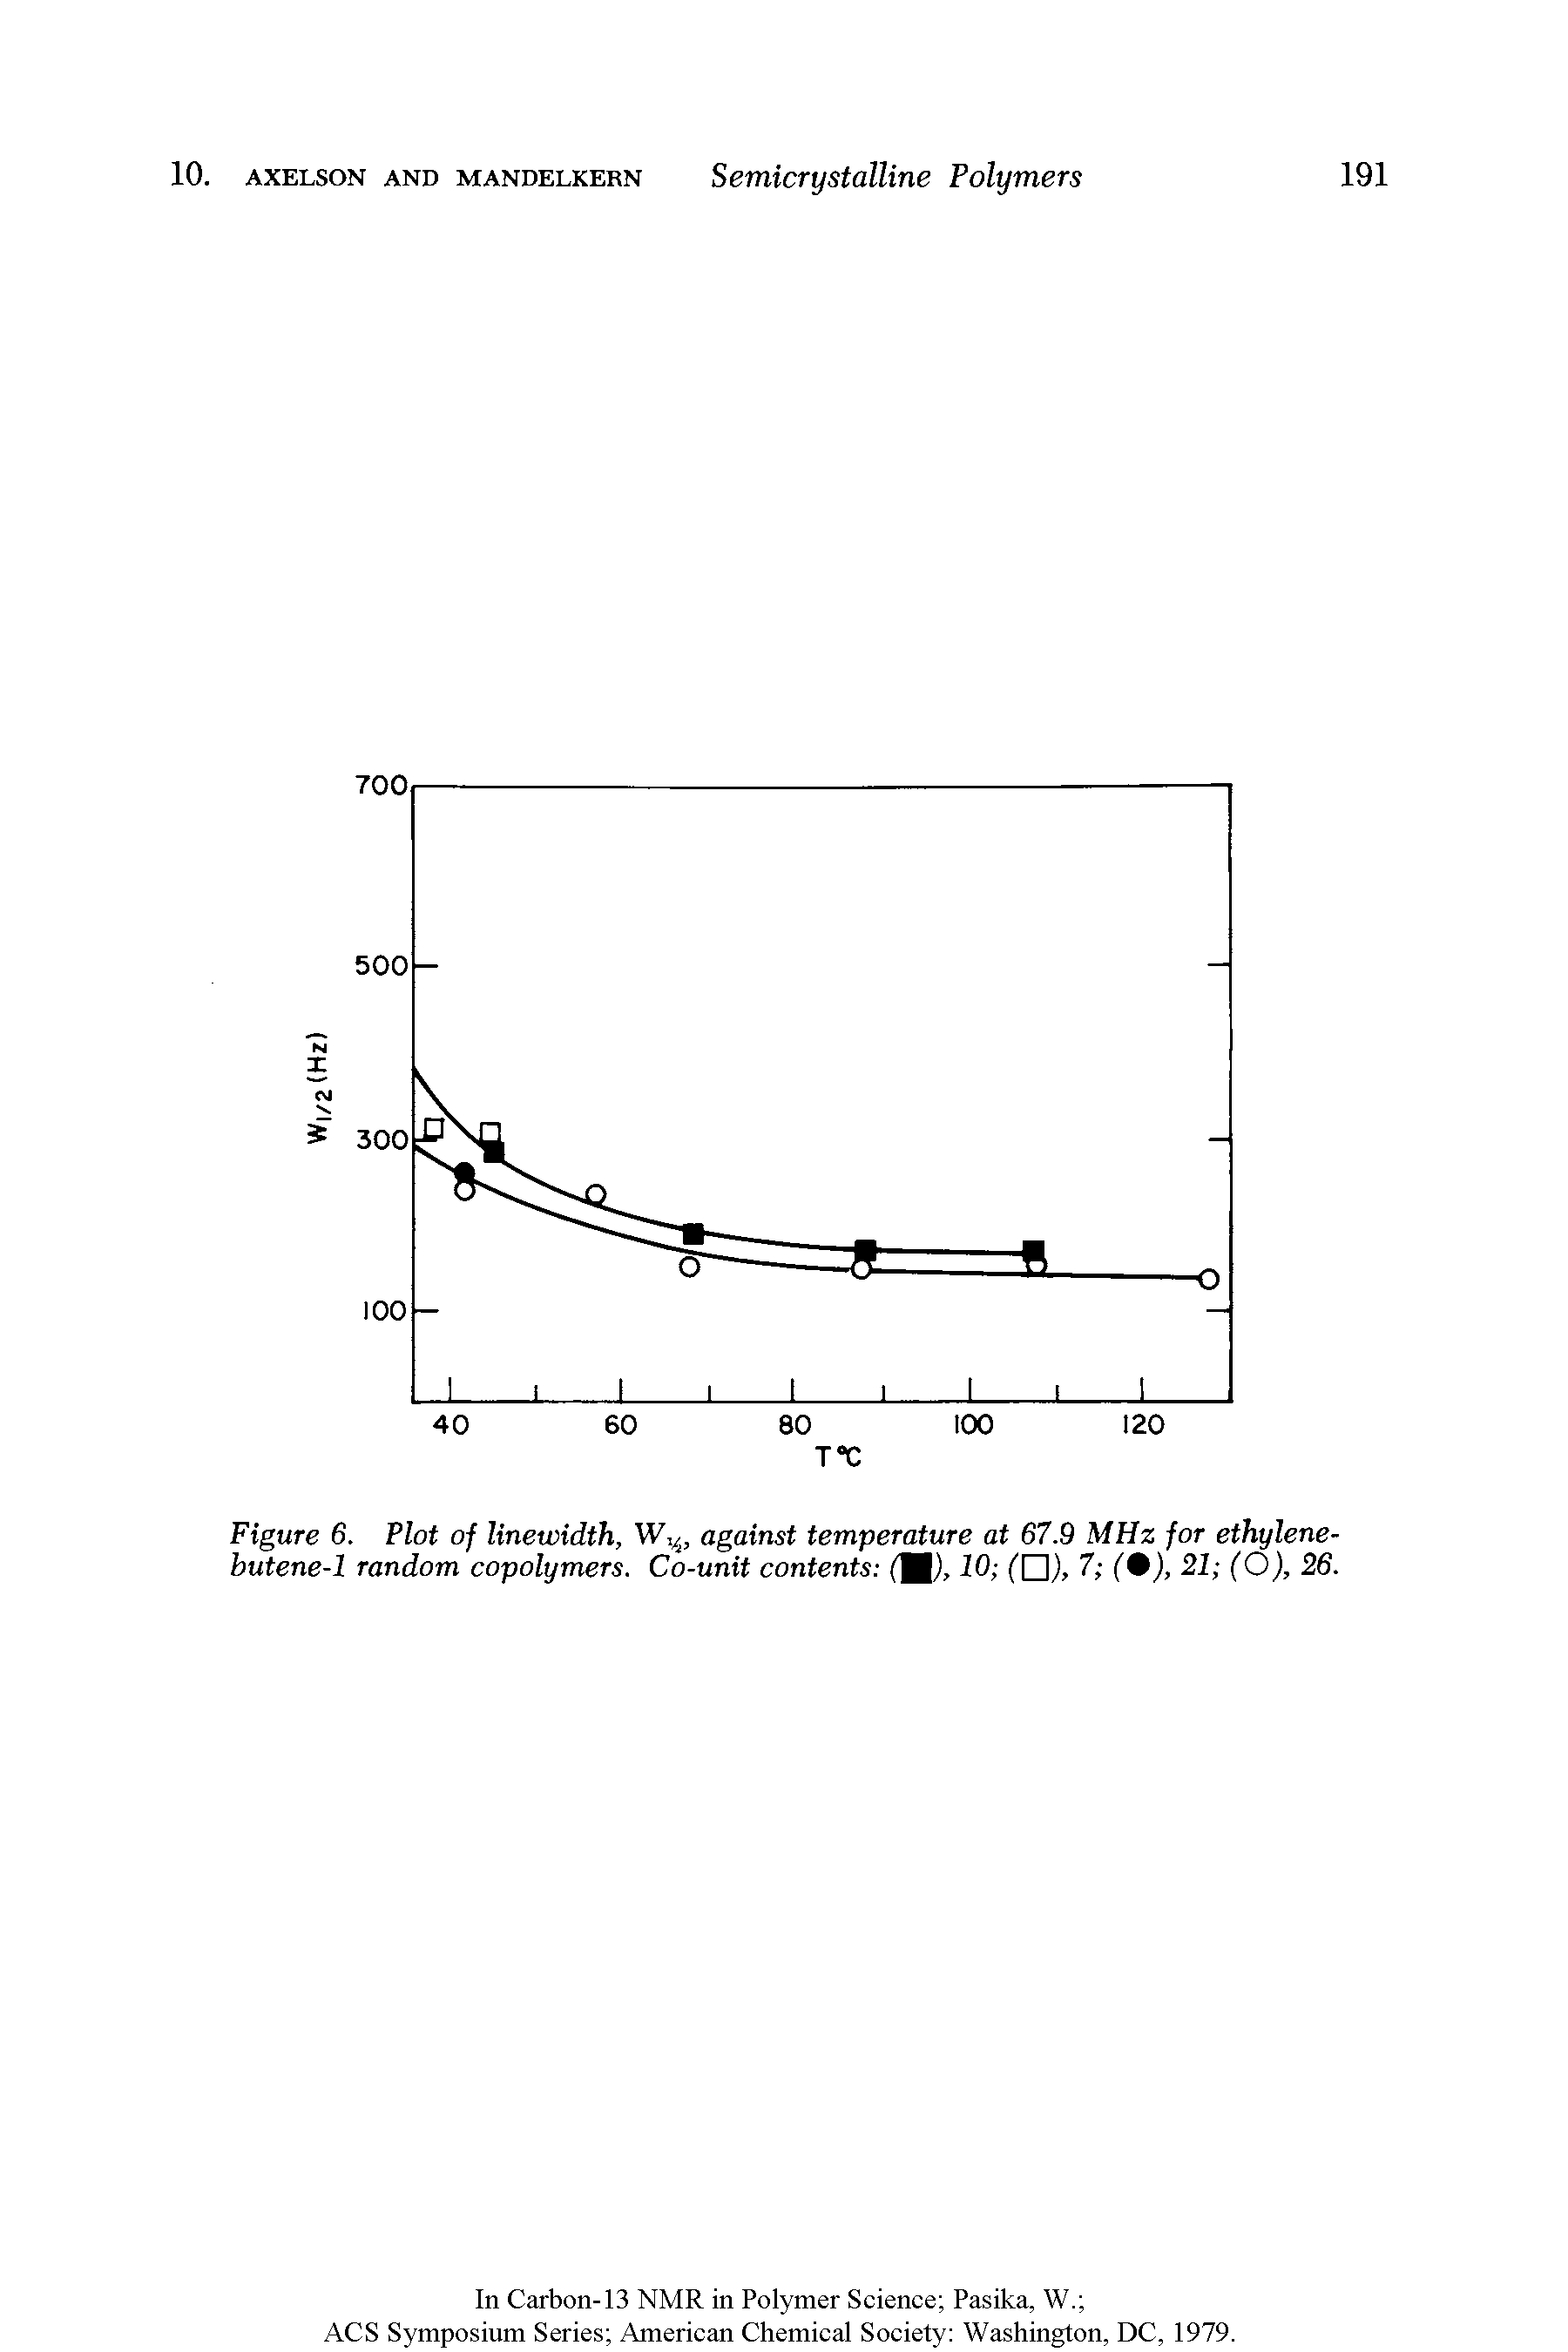 Figure 6. Plot of linewidth, against temperature at 67.9 MHz for ethylene-butene-1 random copolymers. Co-unit contents d), 10 ( ), 7 (0), 21 (O), 26.